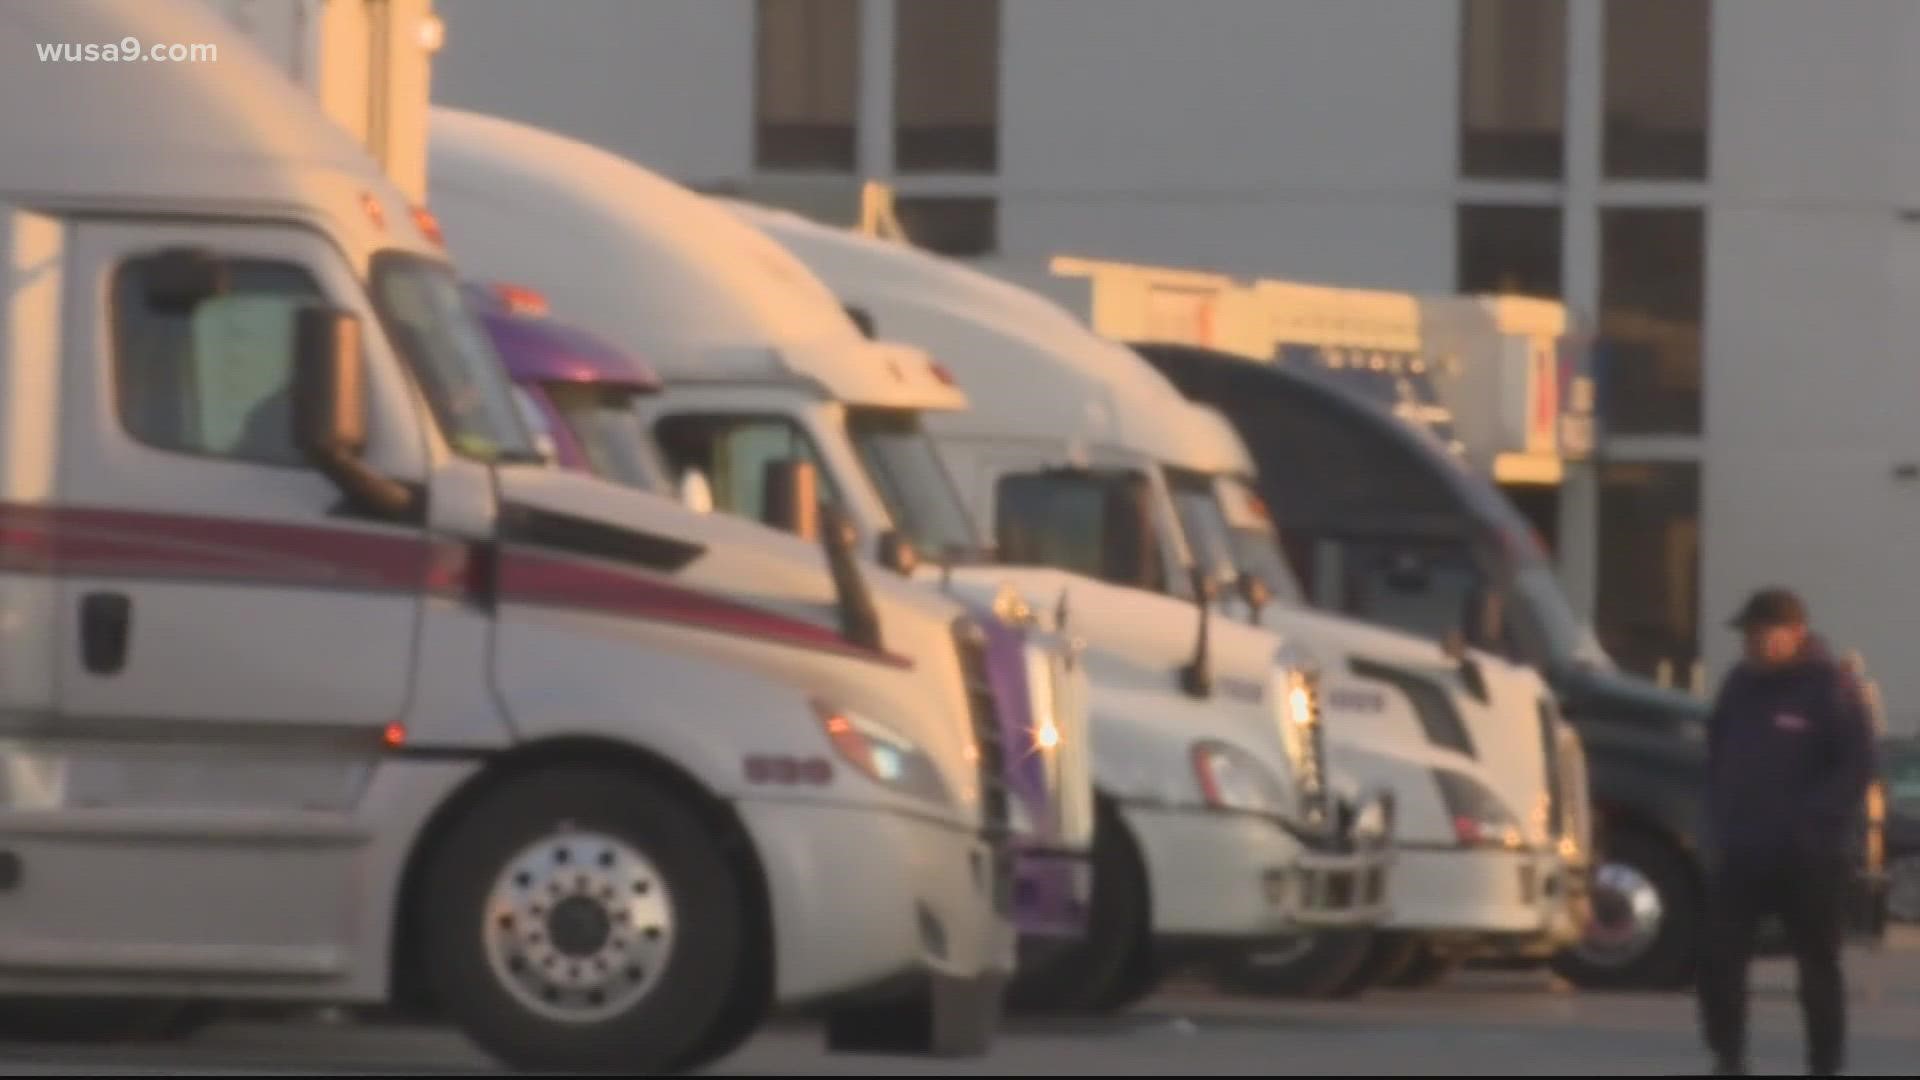 In two days, police in the District will deploy civil disturbance units in preparation for the possible trucker convoys that could cause gridlocks.